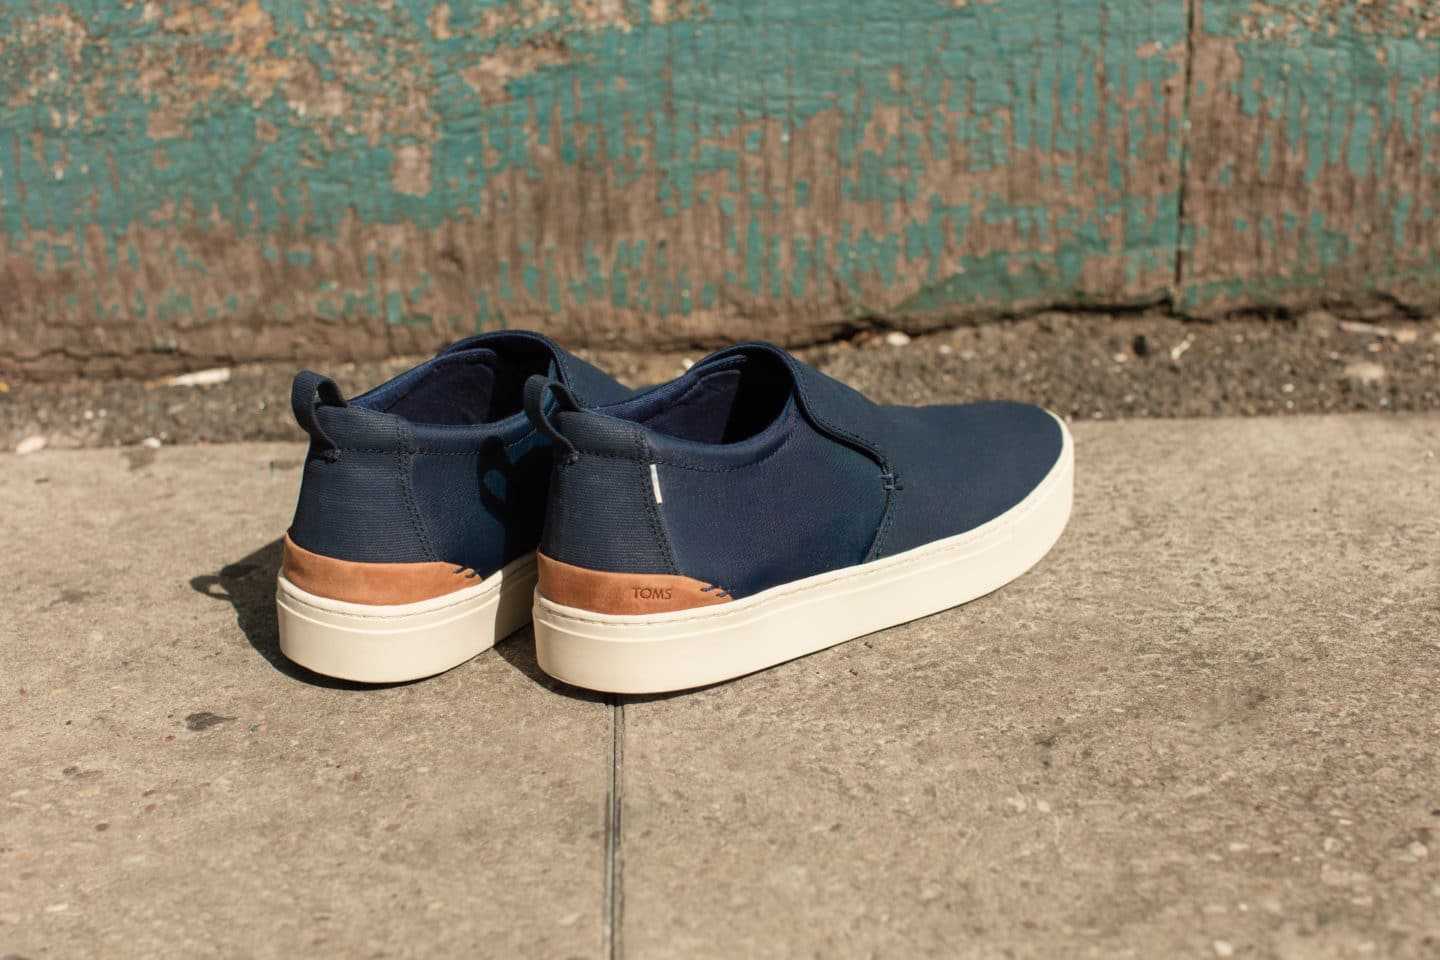 New TOMS sneakers range: video of Joshua Coombes | The Book of Man